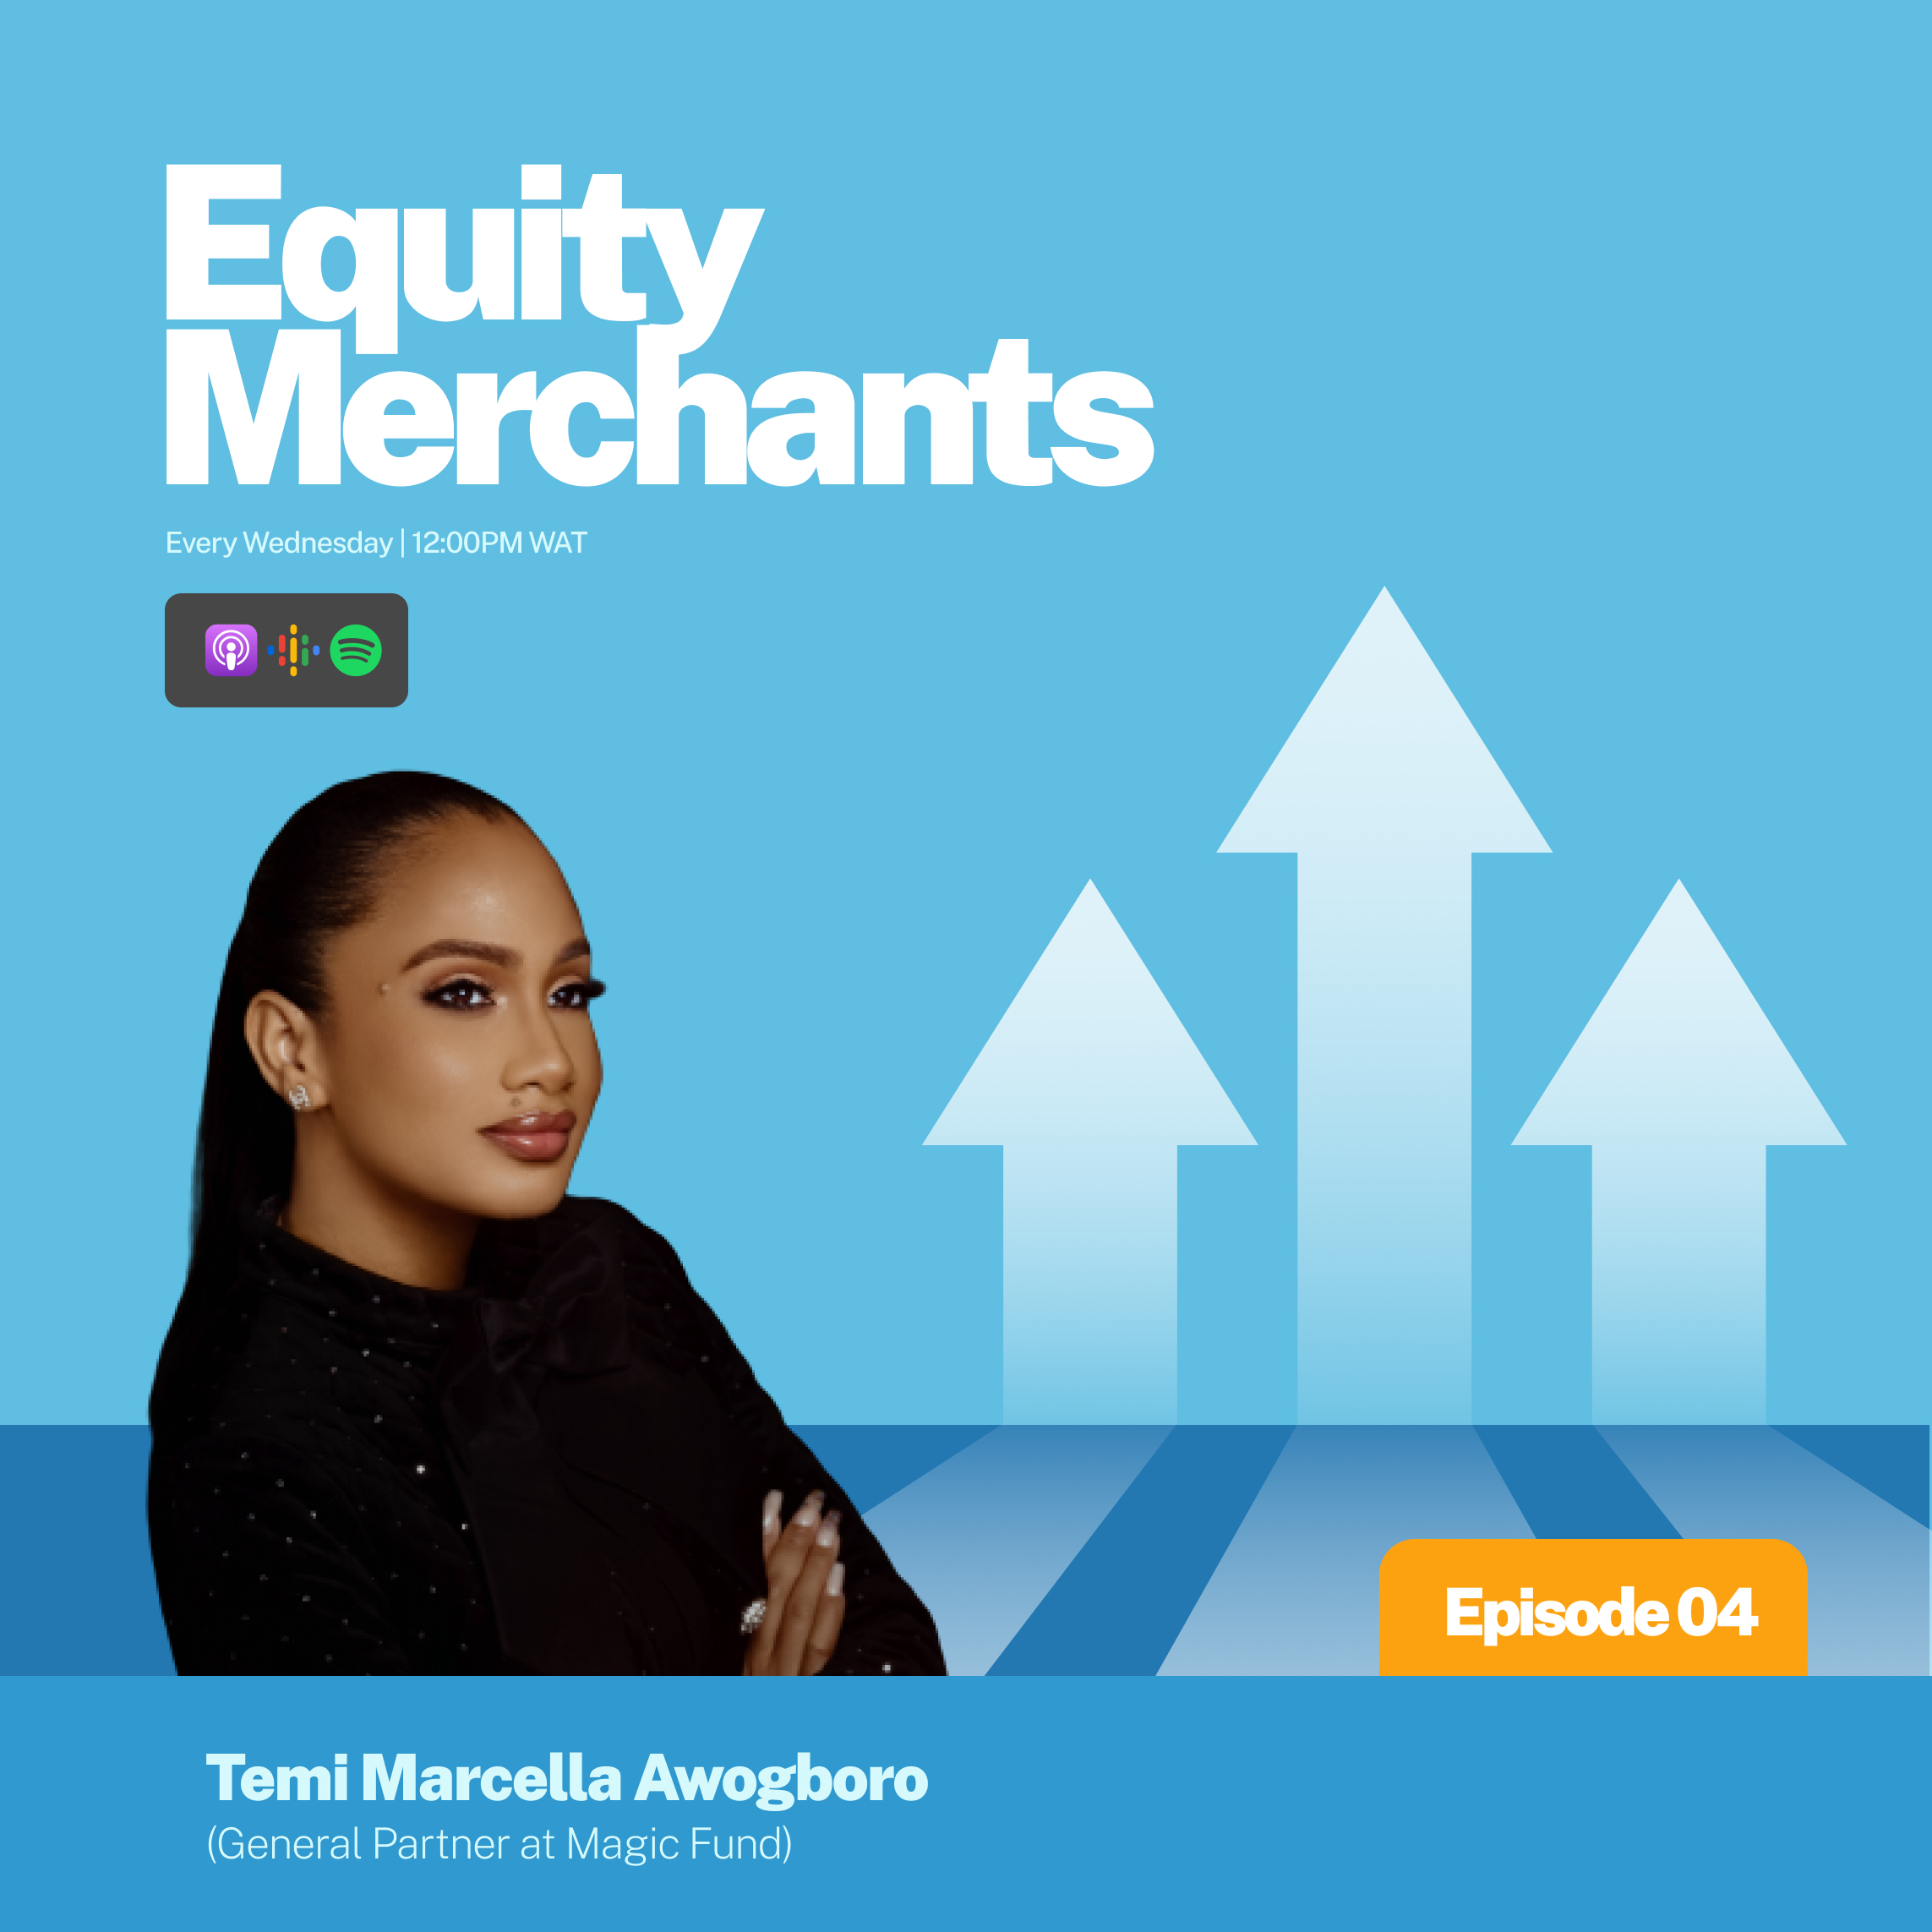 Temi Marcella Awogboro, General Partner at Magic Fund on the growth of Africa's startup ecosystem, how she helps startups grow, the role of investors in creating corporate governance, and how to manage the relationship with co-founders.